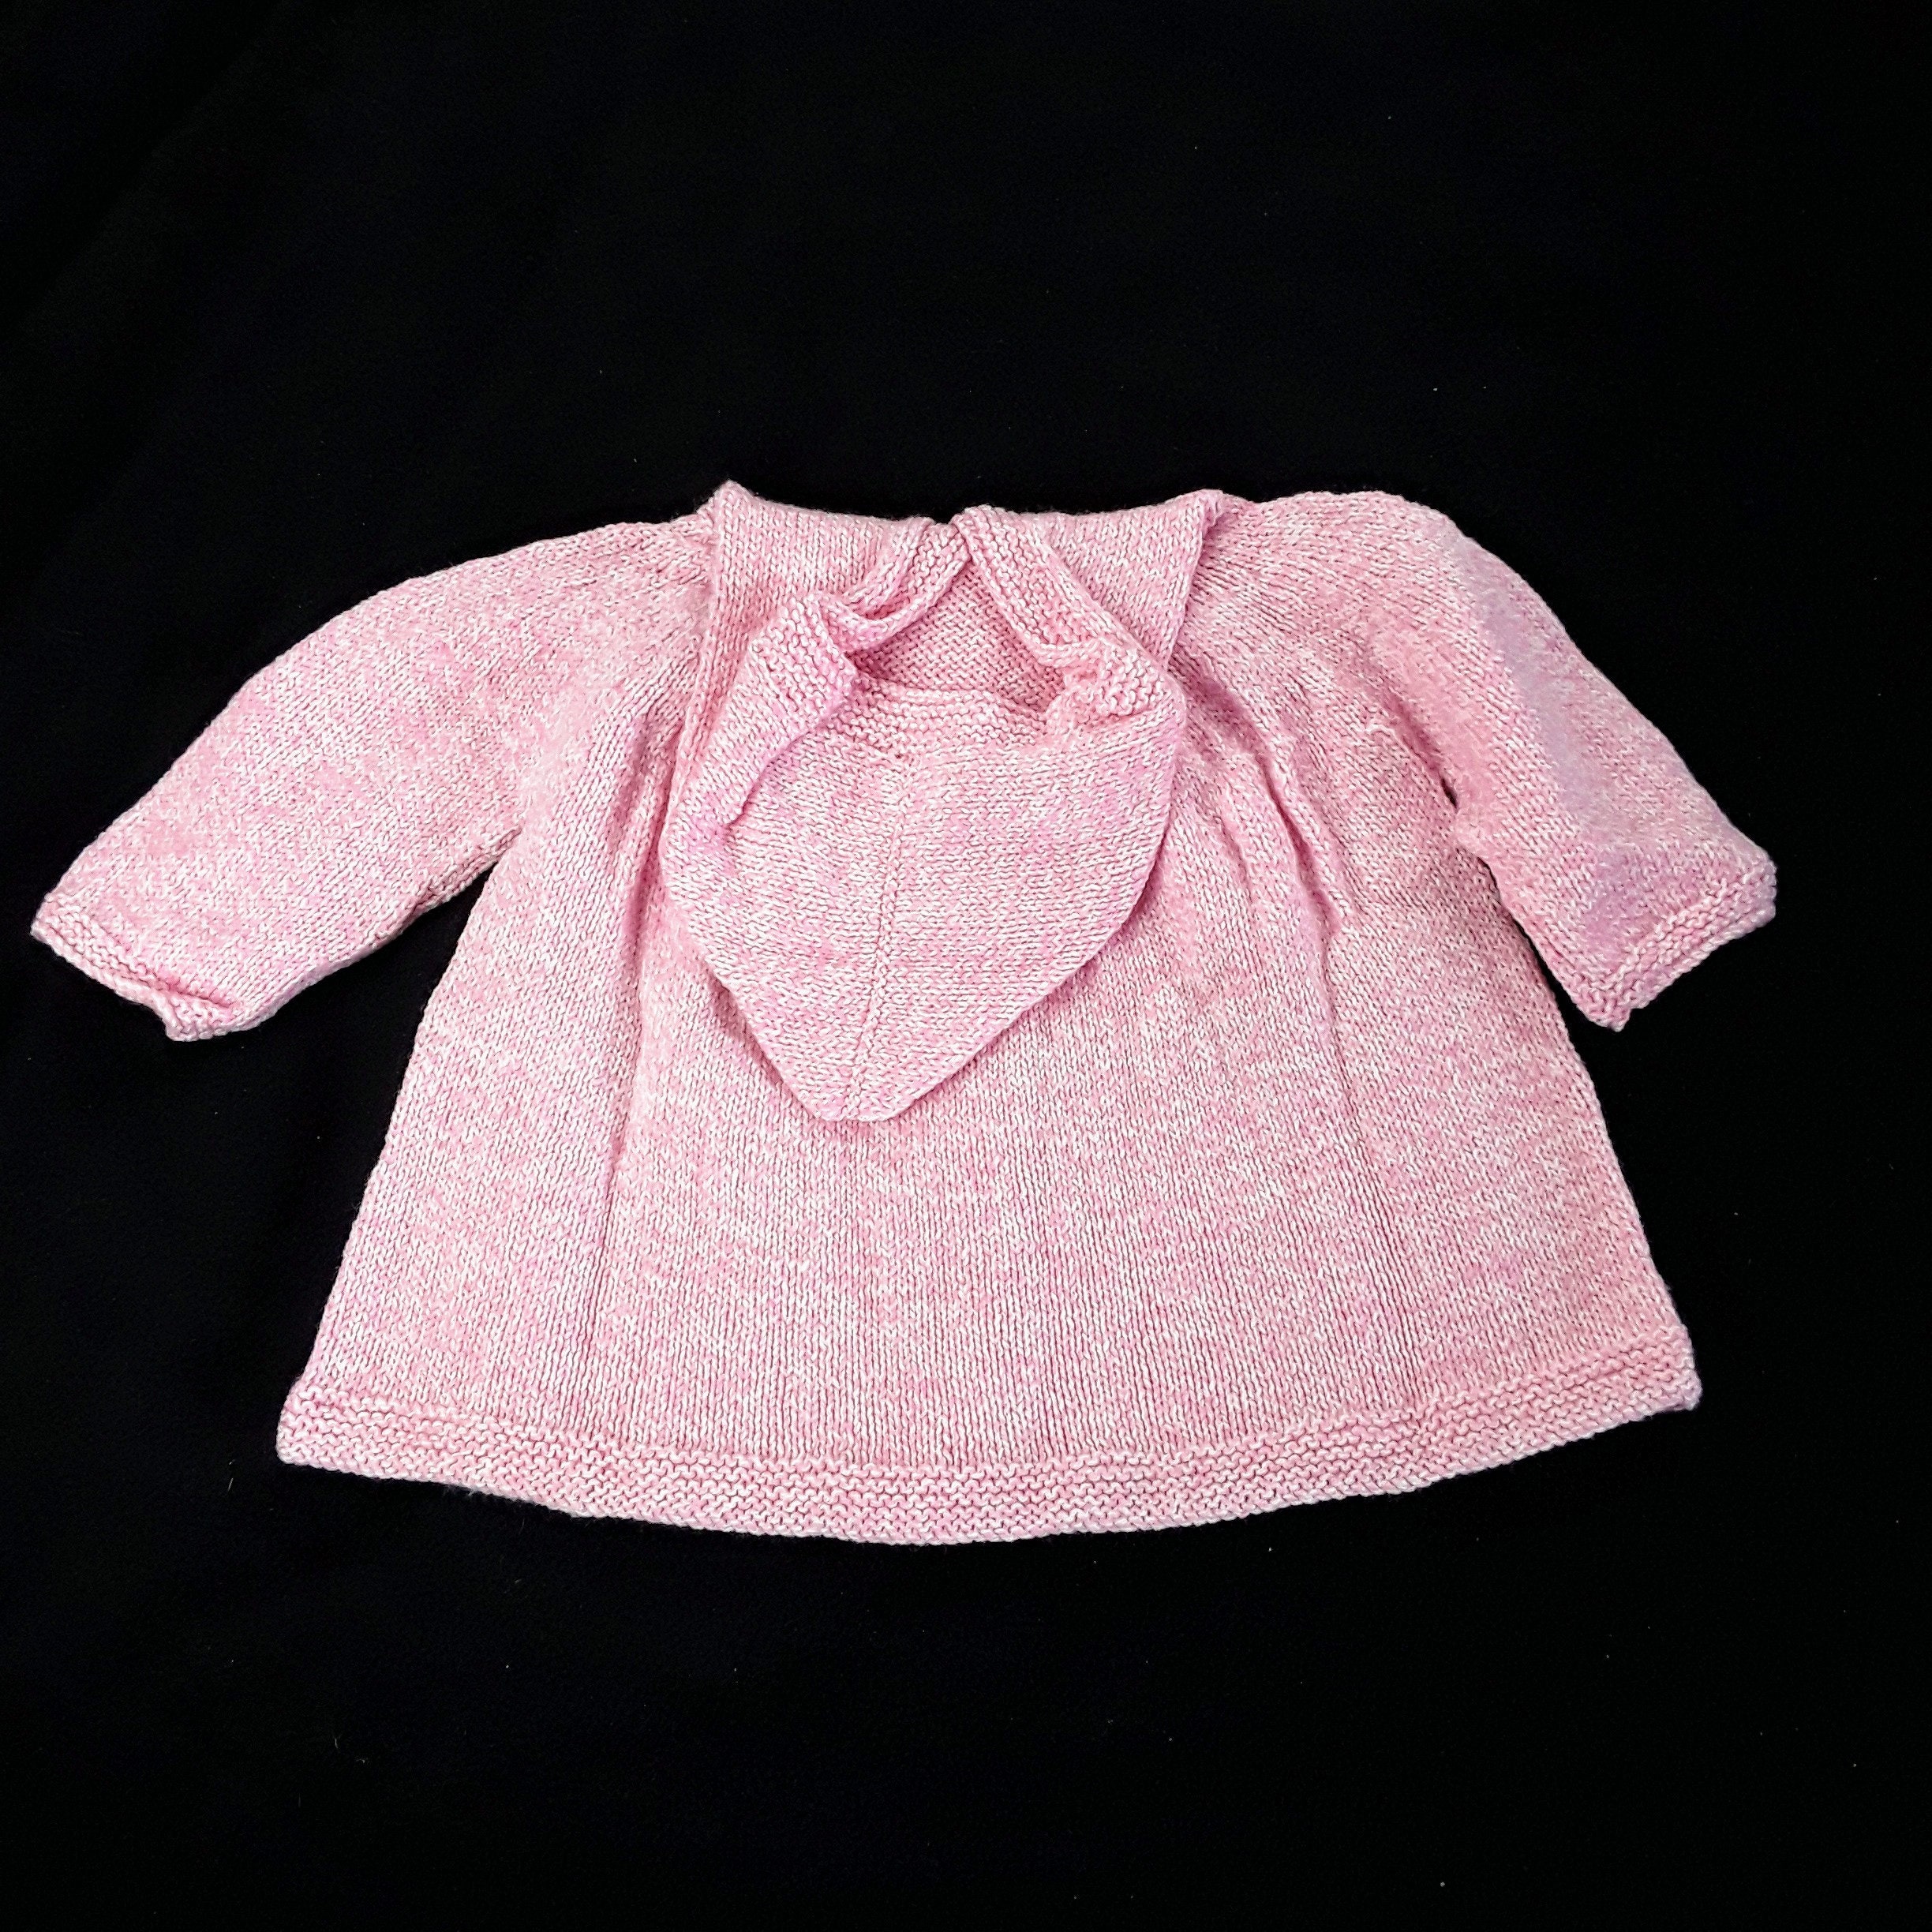 Hand Knitted Pink Baby Girls Hooded Hoodie Cardigan 0-3 Months - Etsy UK